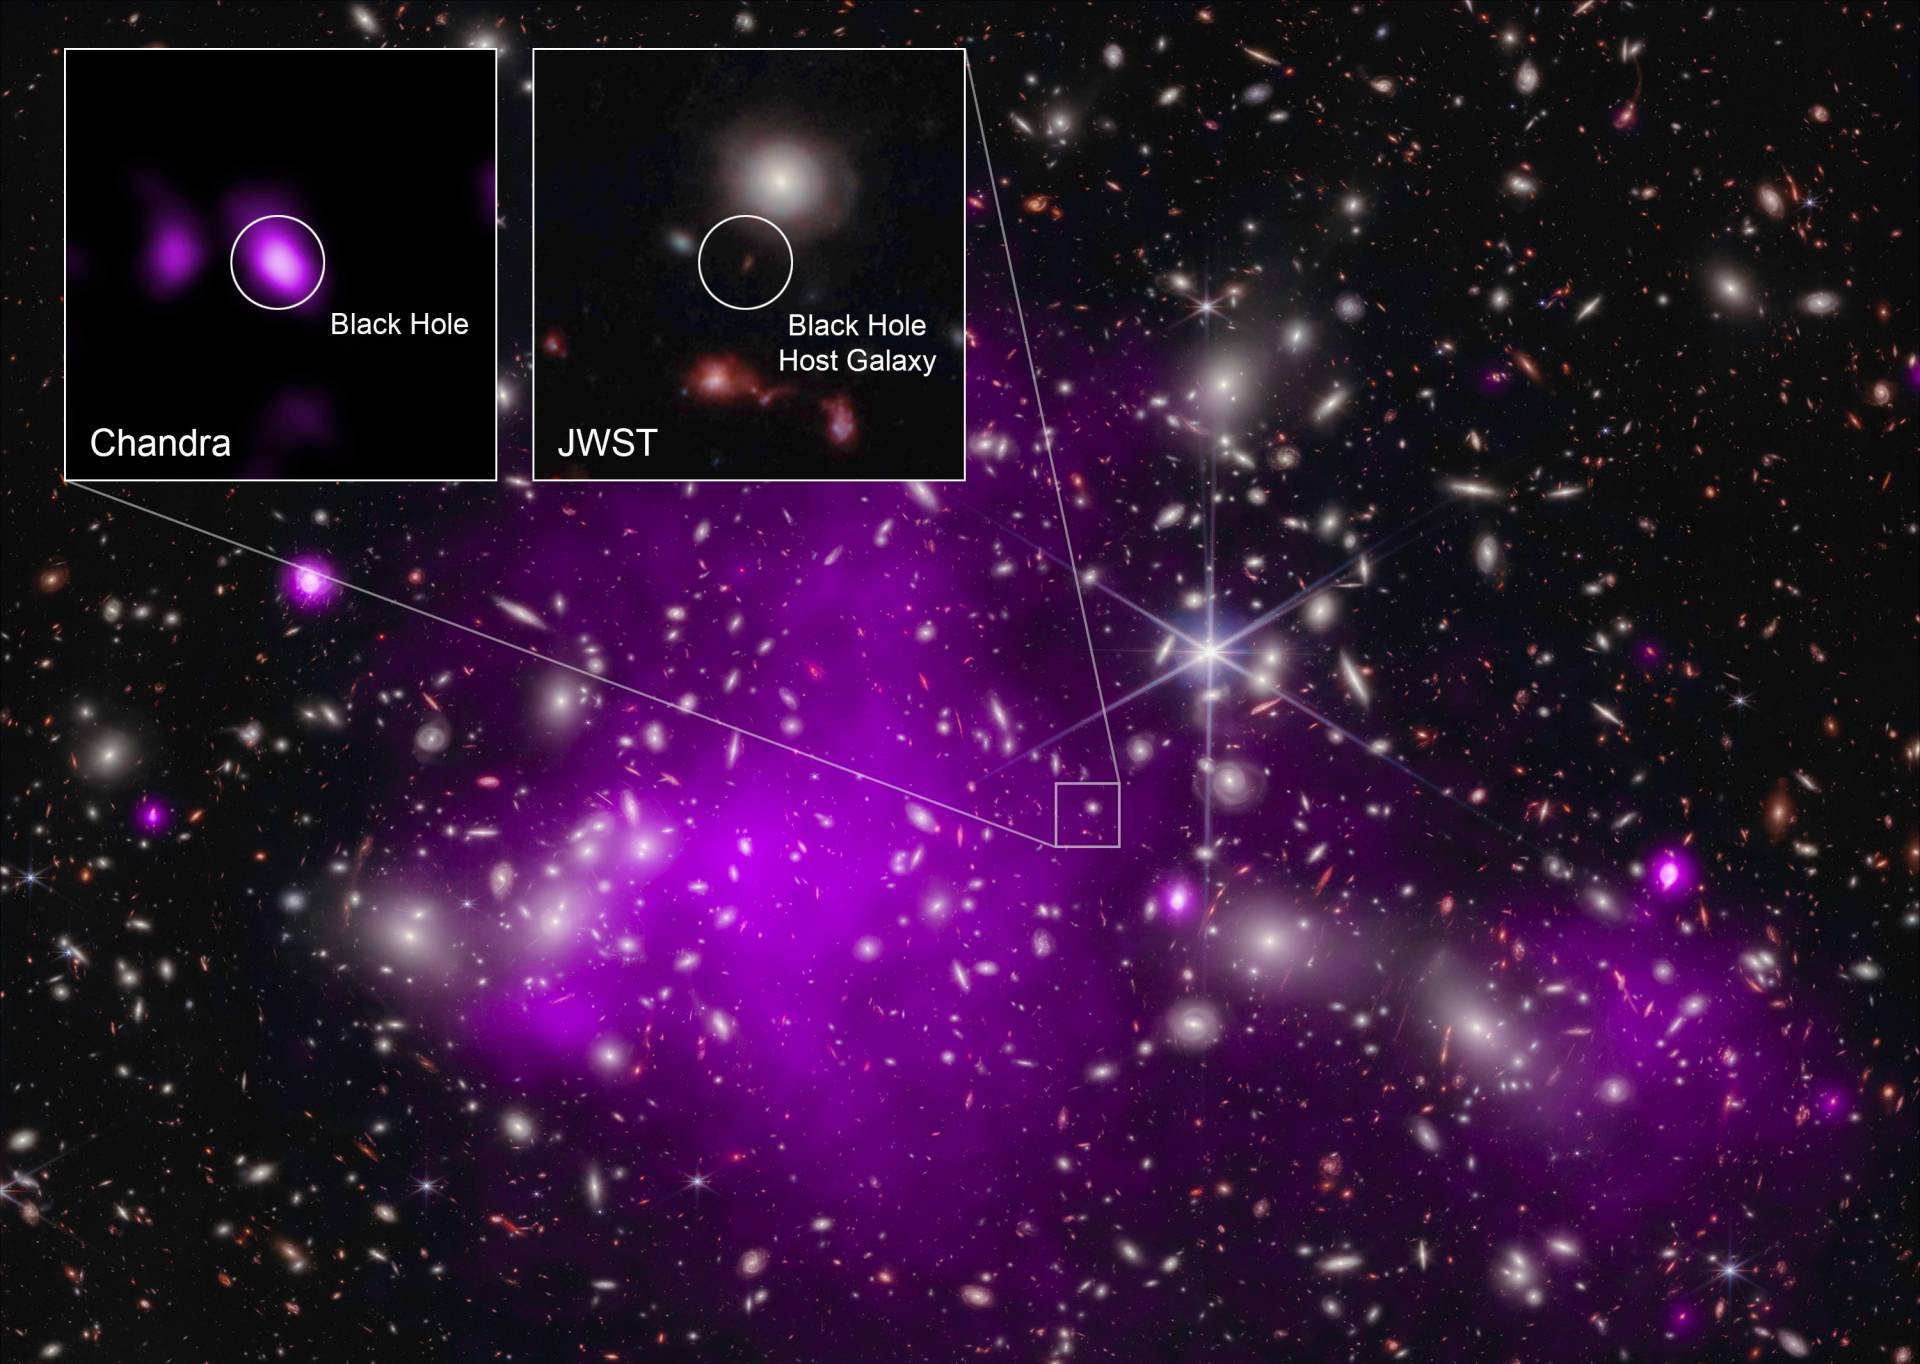 A cluster of stars with a purple tint